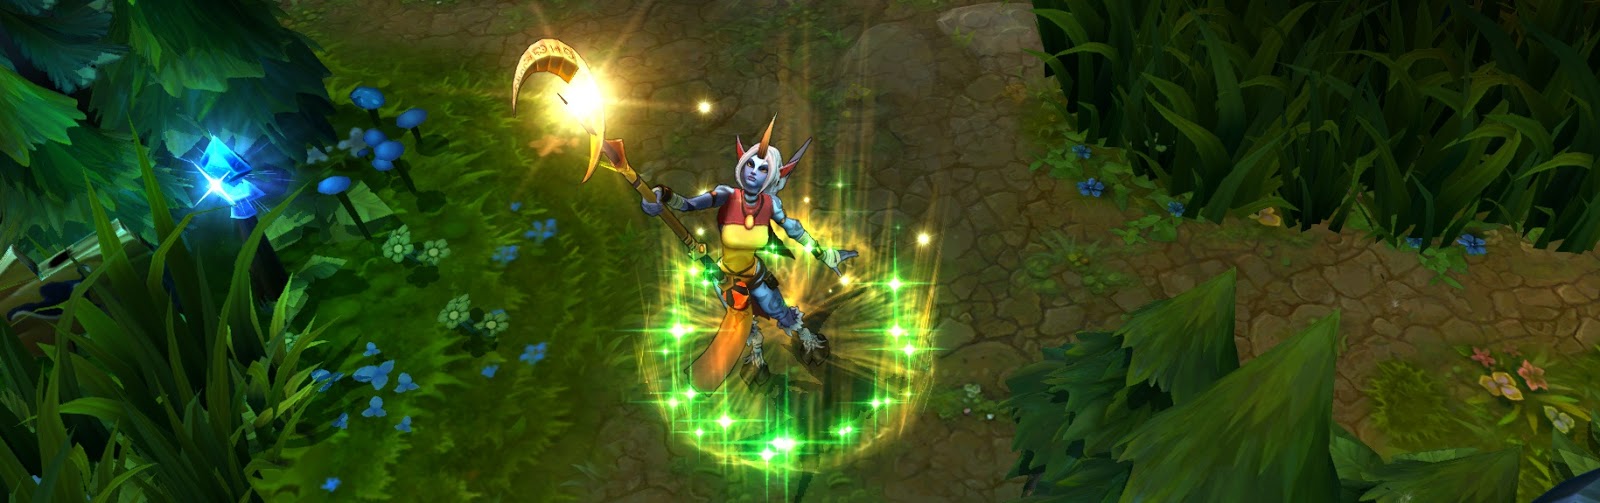 Soraka And Viktor Update Discussions Skin News Lets Enjoy Lol Life With This Blog